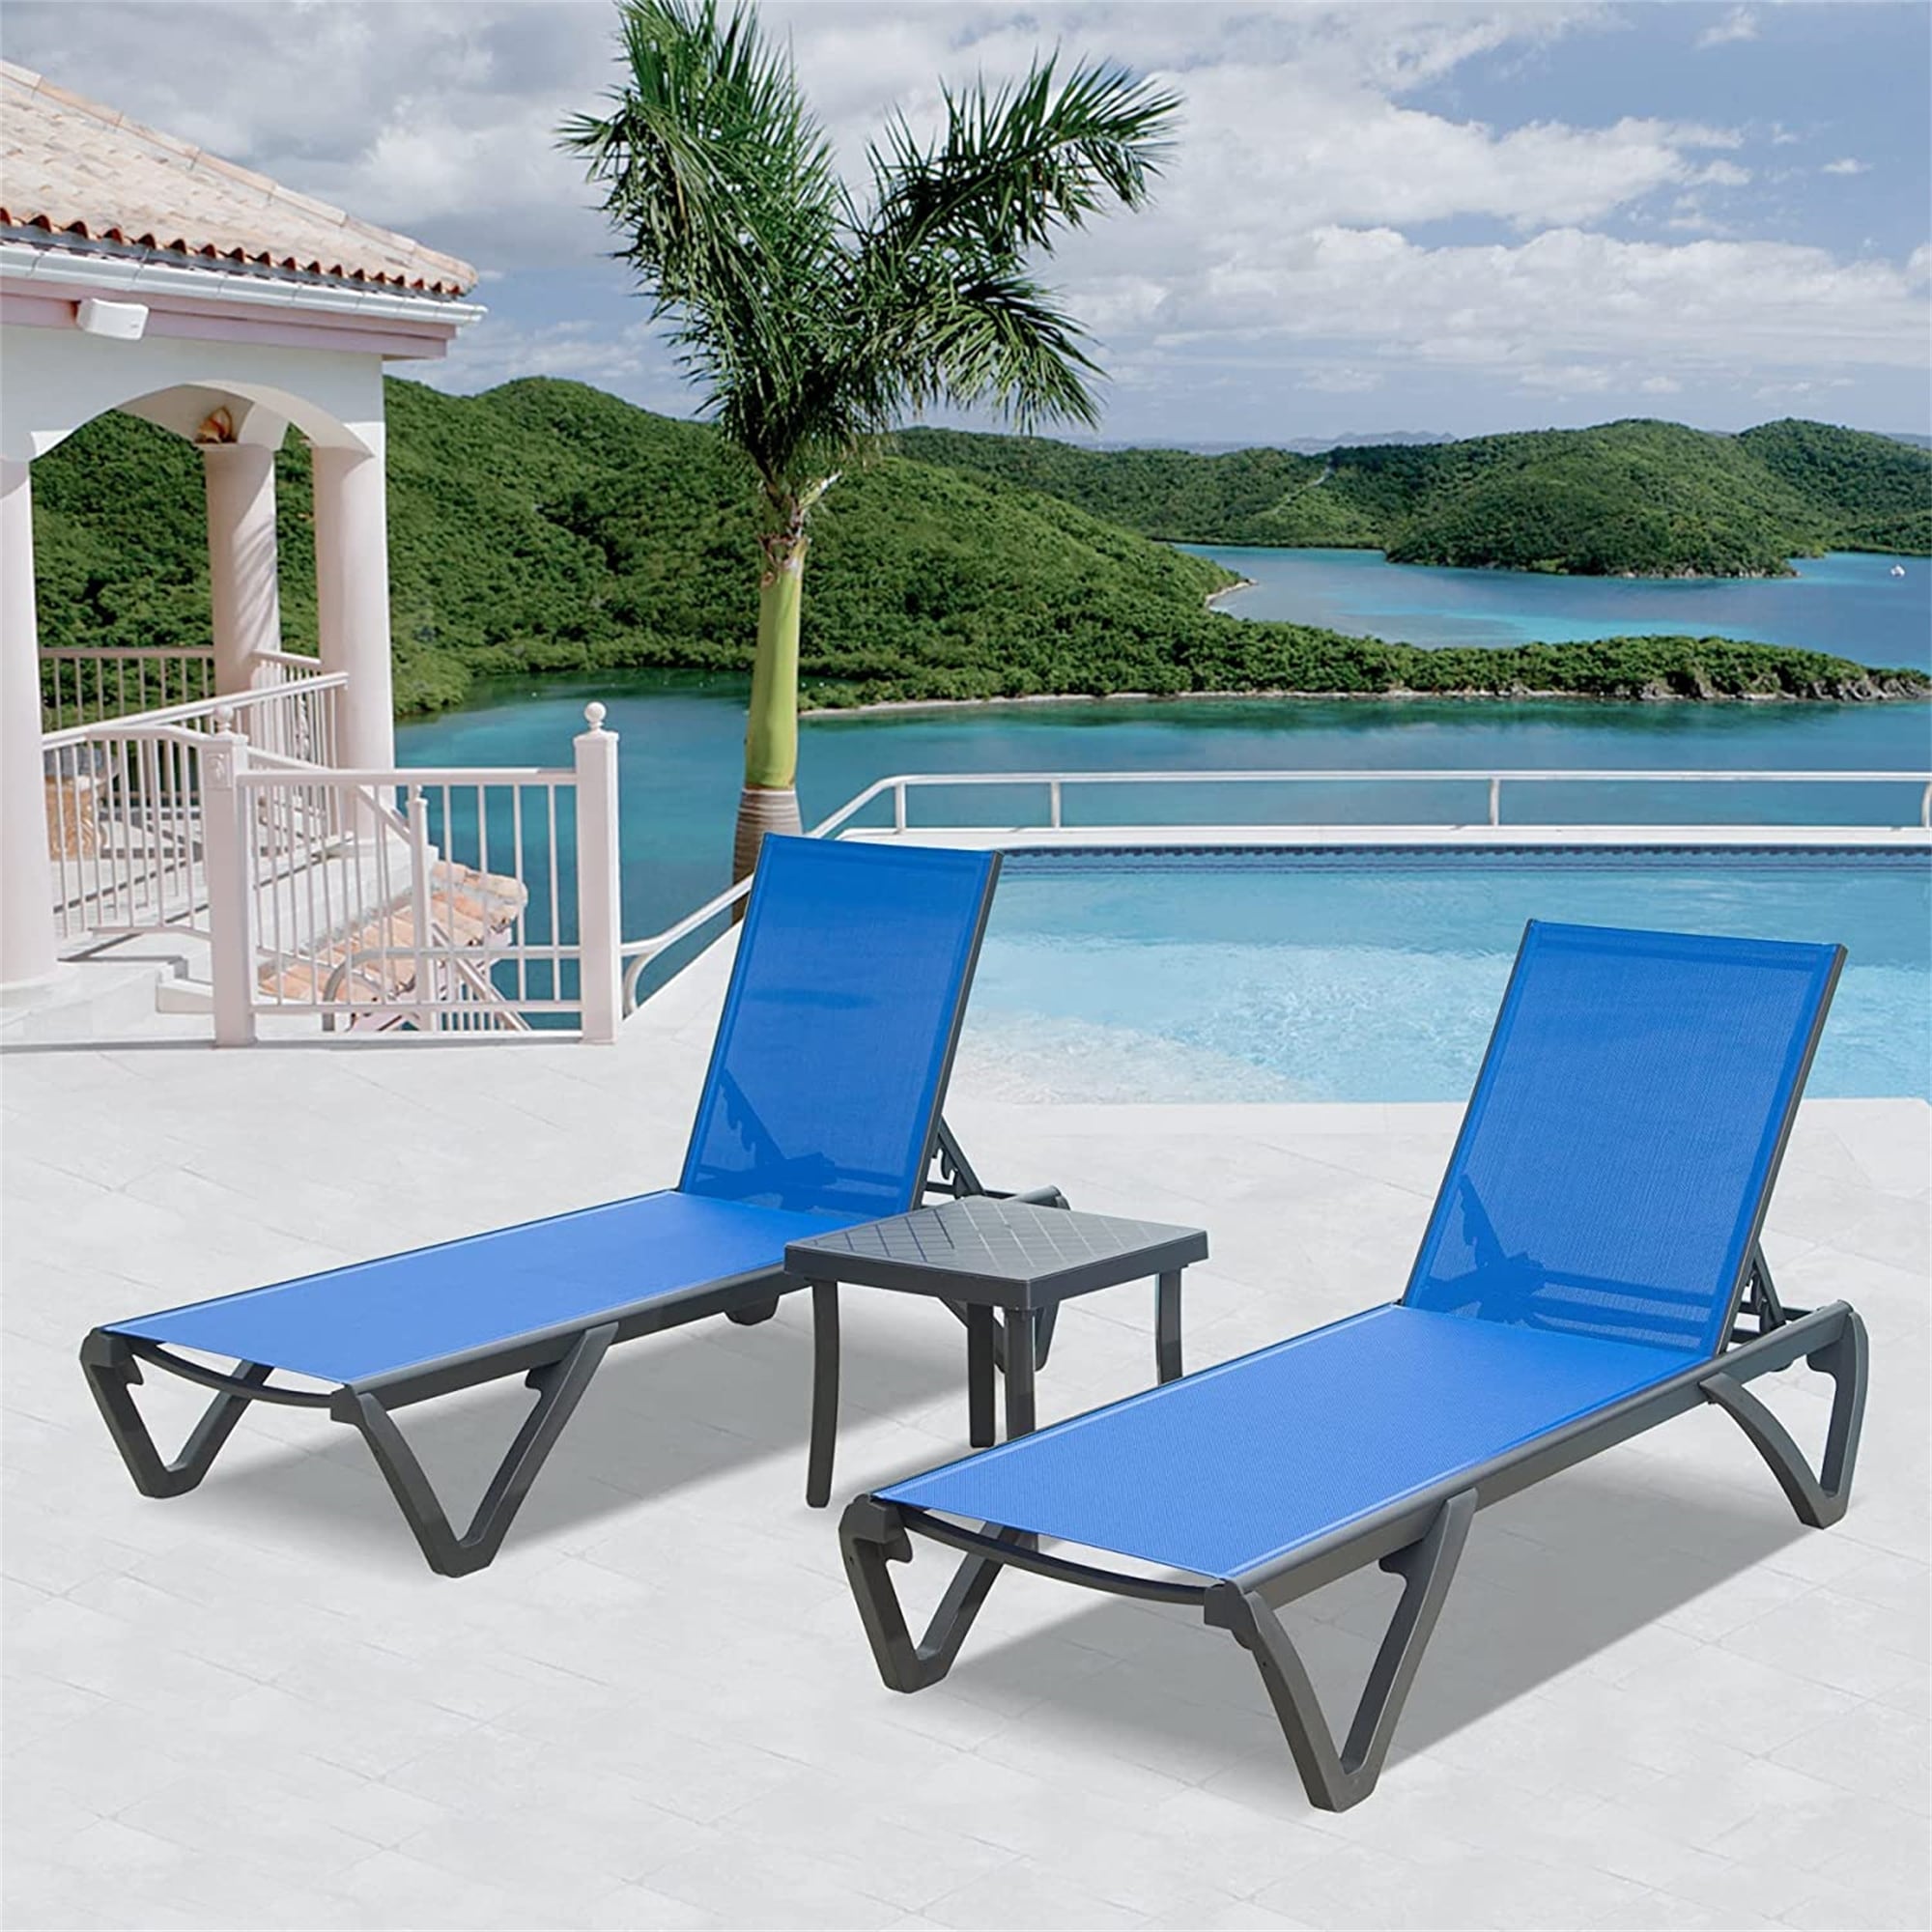 Patio Chaise Lounge Chair Set Of 3 Outdoor Sunbathing Chair